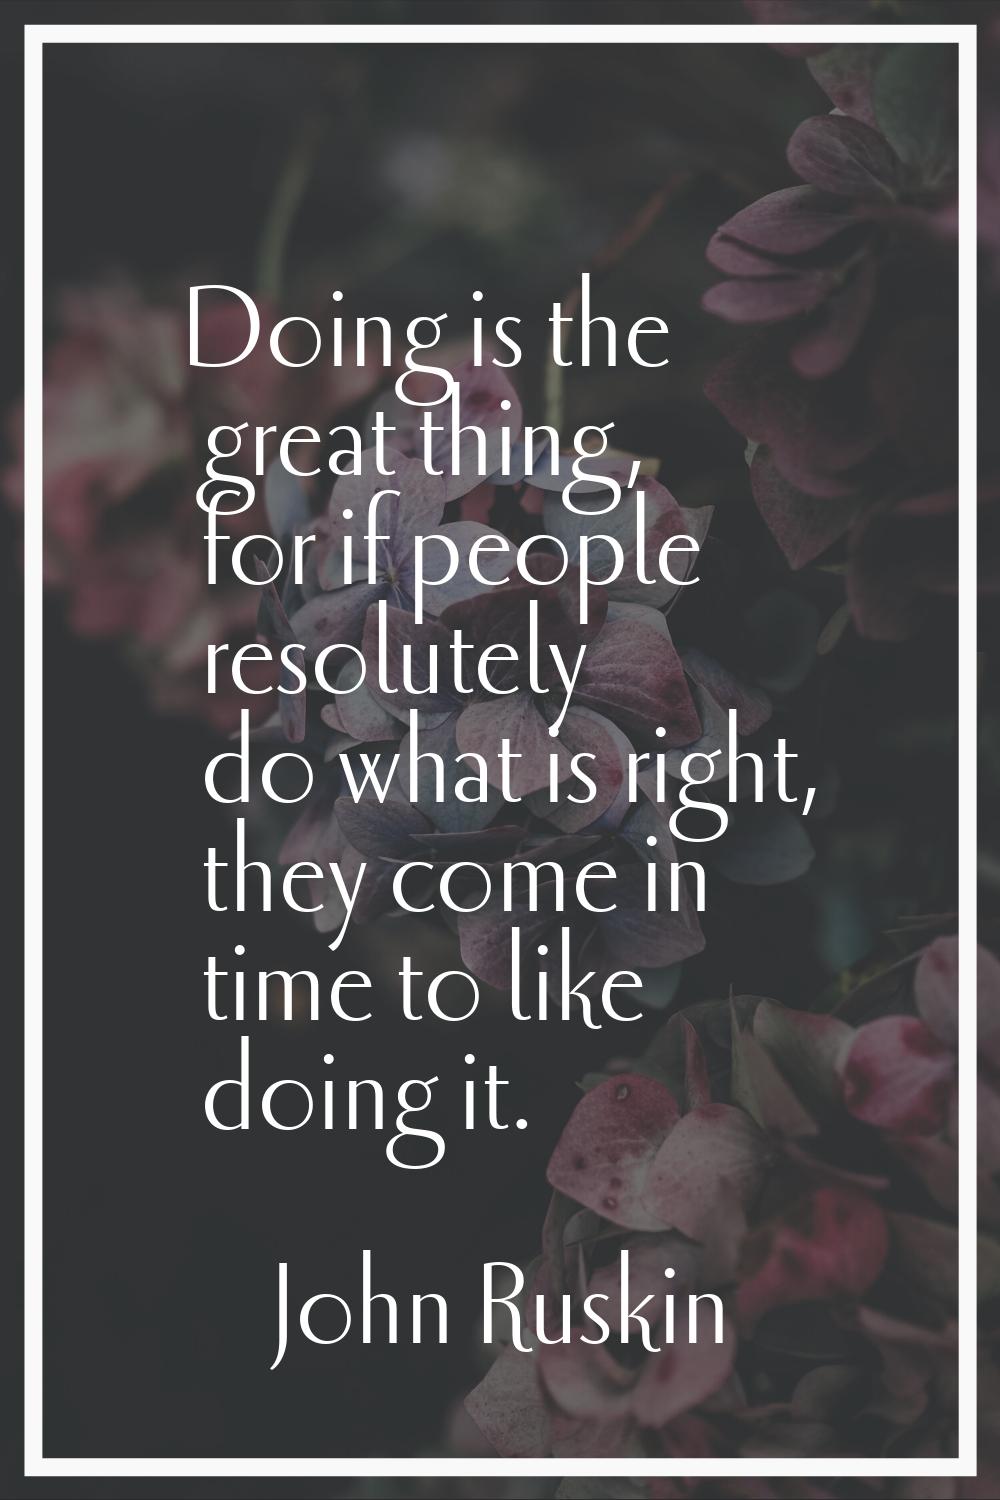 Doing is the great thing, for if people resolutely do what is right, they come in time to like doin